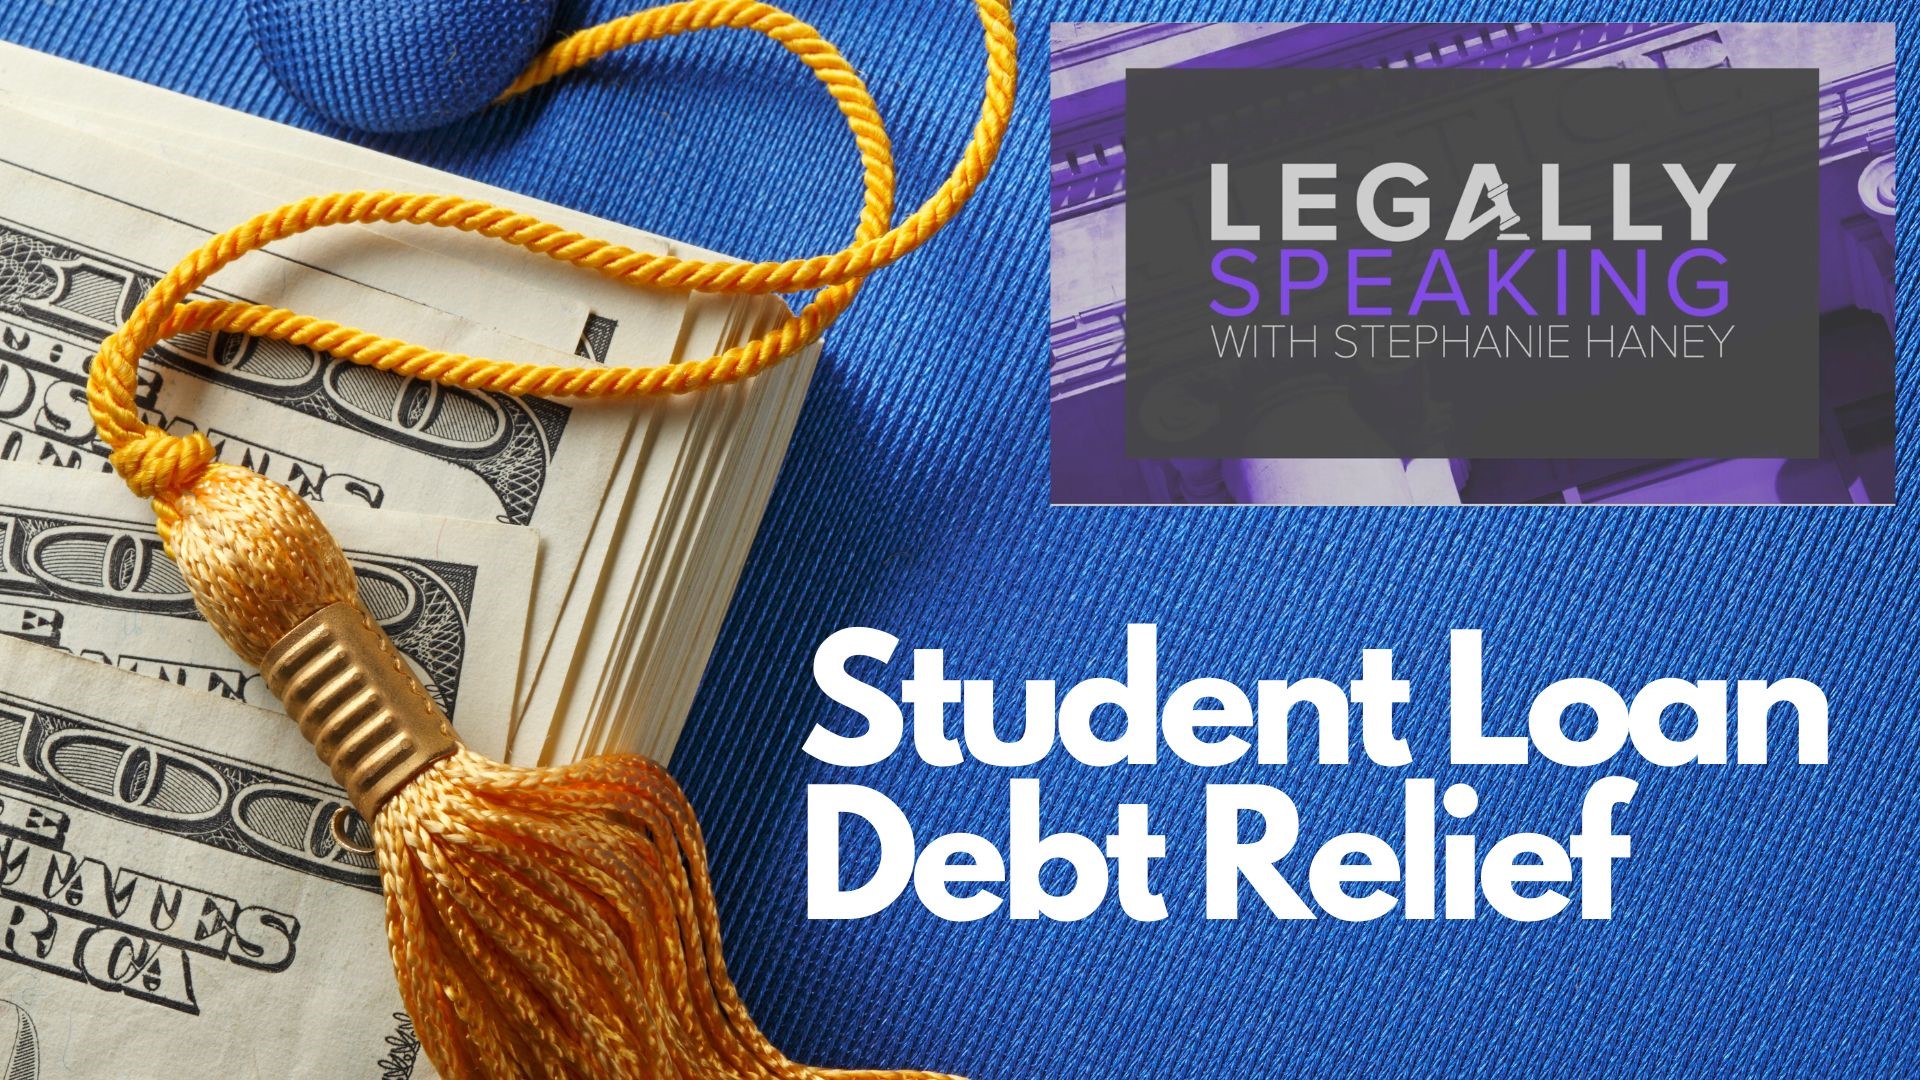 WKYC's Stephanie Haney, a legal analyst and attorney, answers legal questions about student loan debt relief and helps make sense of the latest changes.